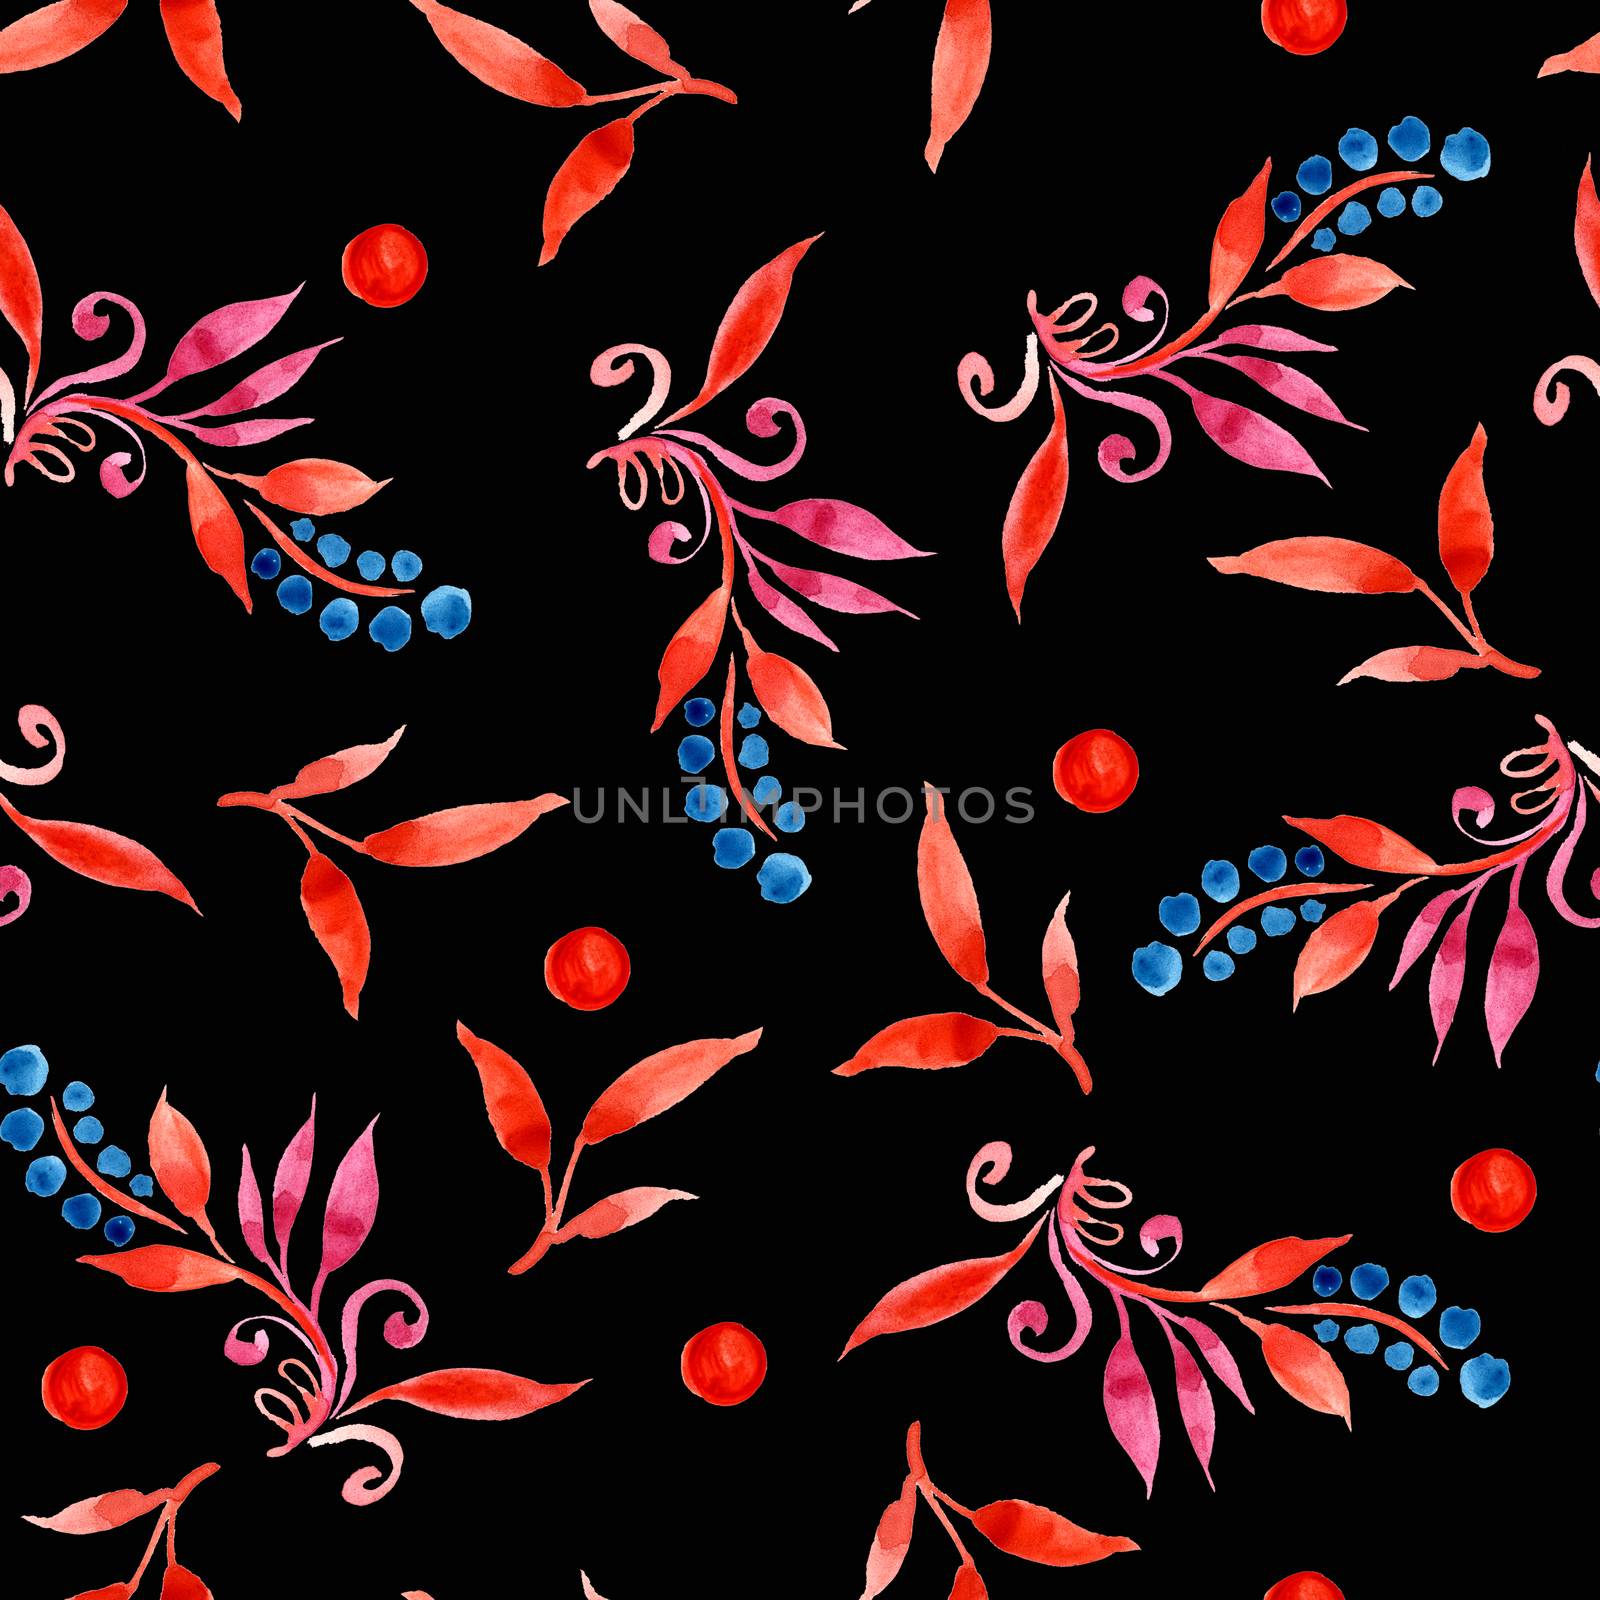 floral watercolor seamless pattern with leaves and berries in red and blue colors on black background, hand-drawn illustration